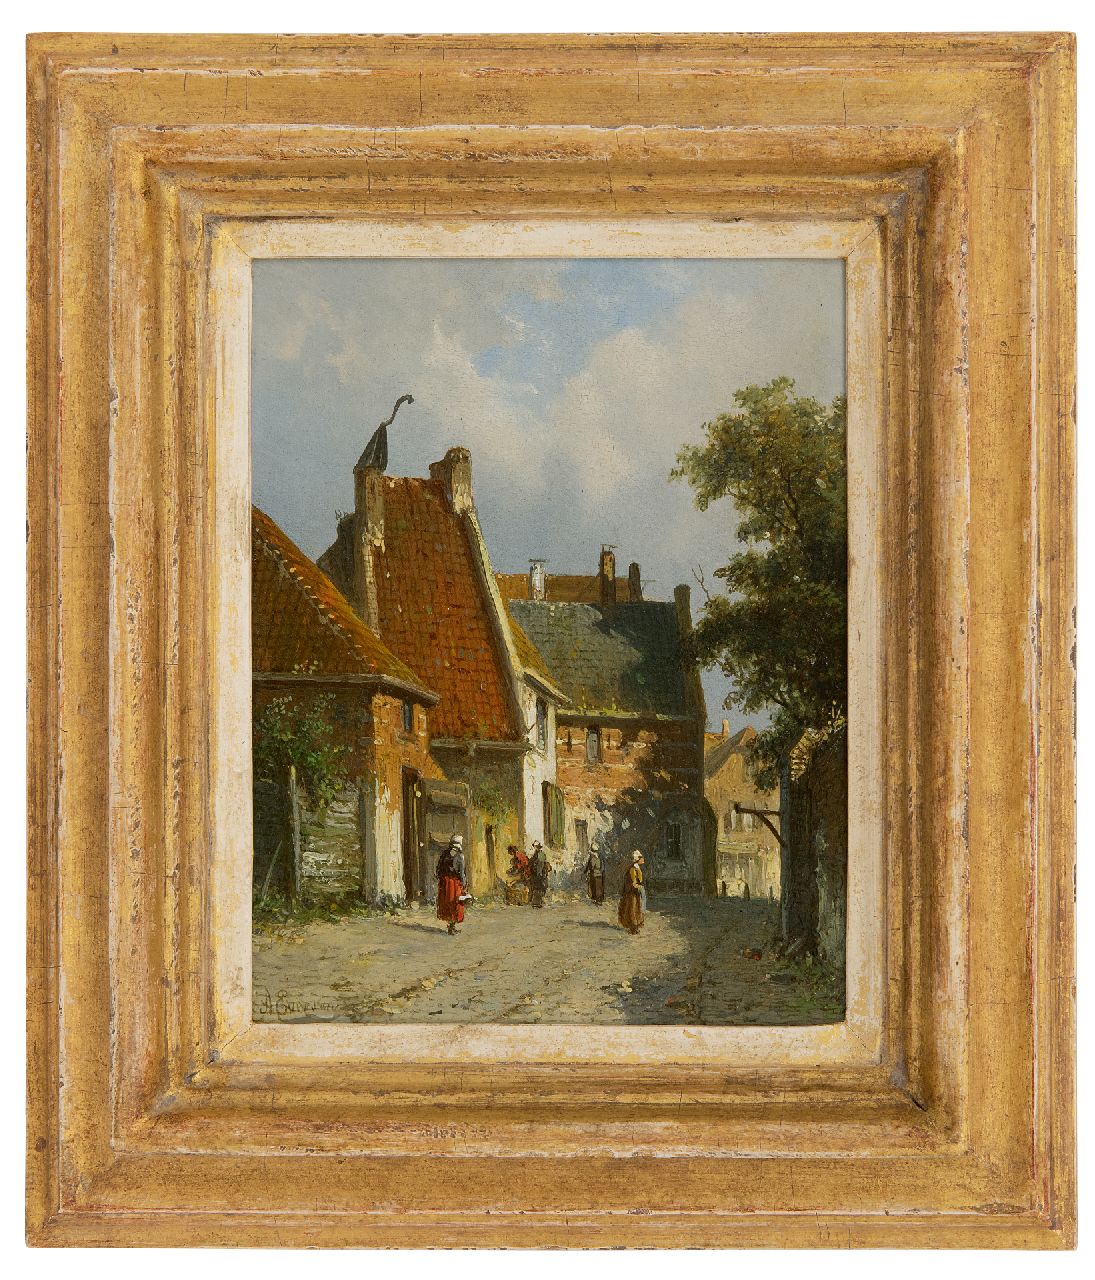 Eversen A.  | Adrianus Eversen | Paintings offered for sale | Sunny village street, oil on panel 19.1 x 14.9 cm, signed l.l.